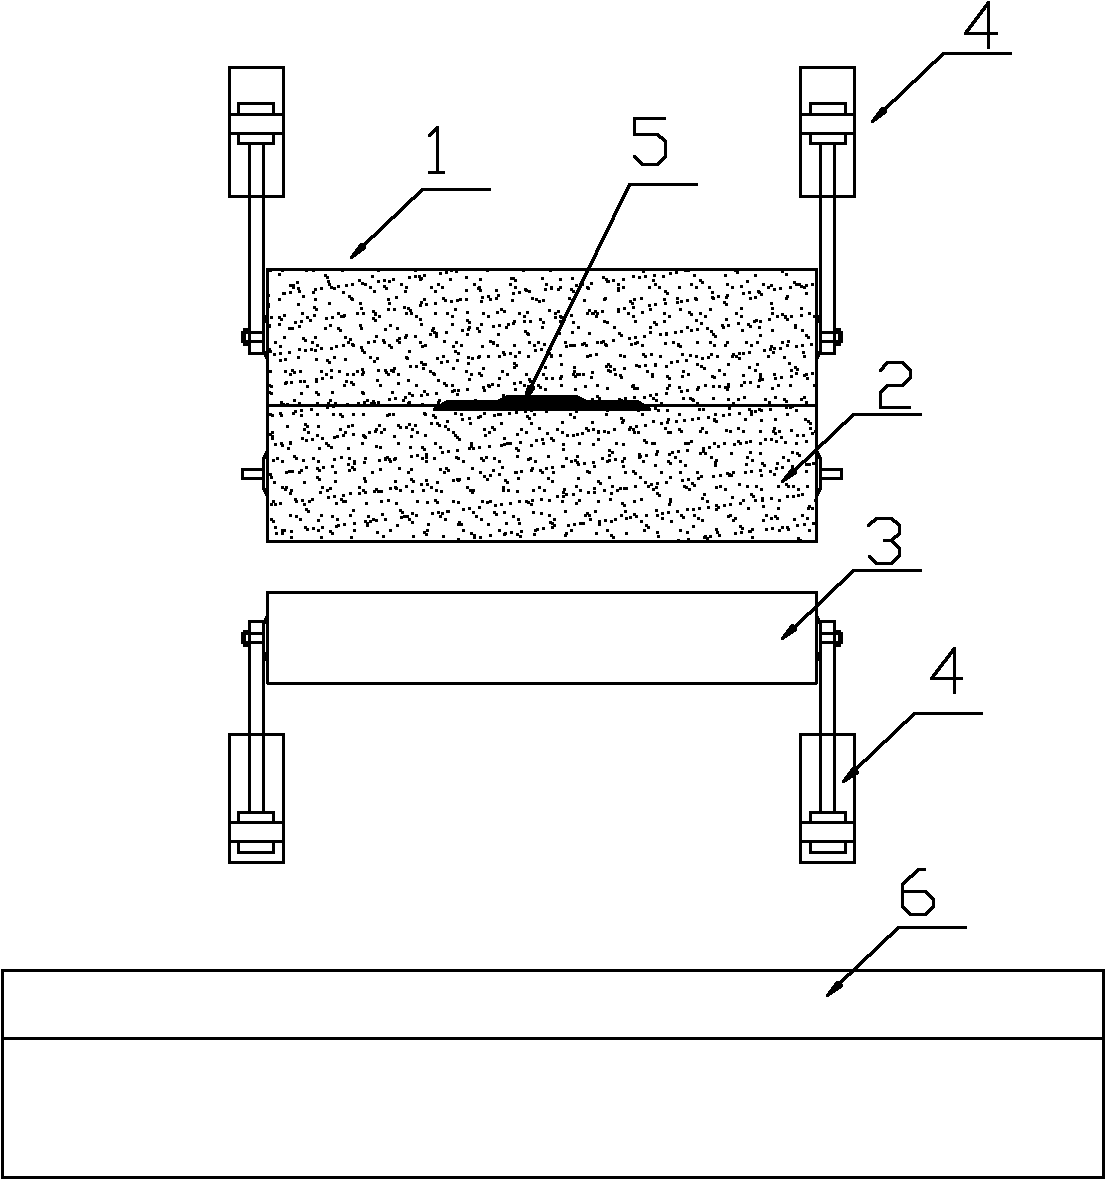 Rubber sheet dewatering device